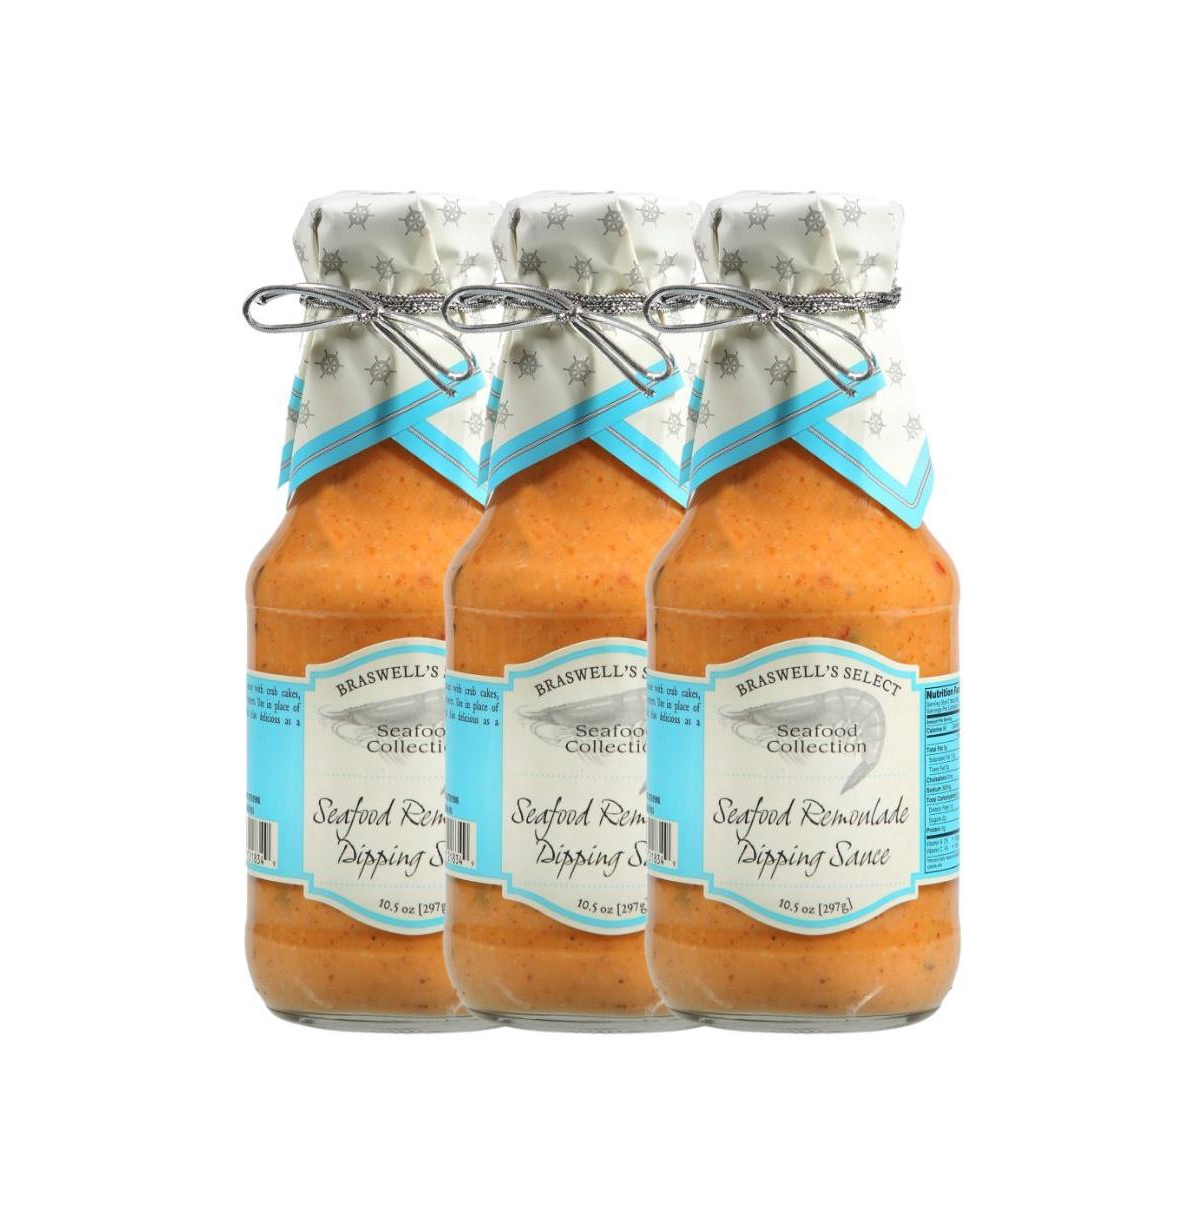 Braswells Seafood Remoulade Dipping Sauce 10.5 oz (3 Pack)